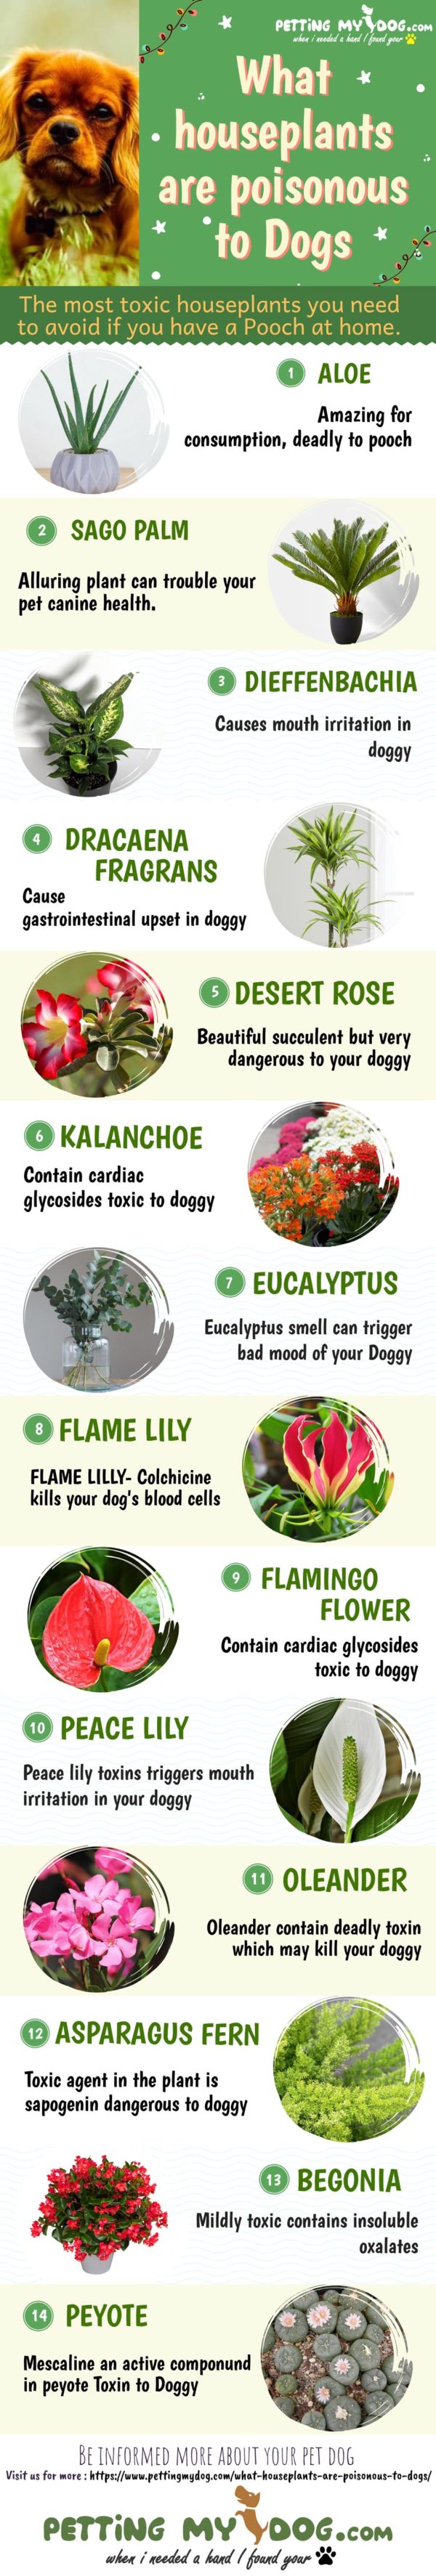 What Houseplants Are Poisonous To Dogs